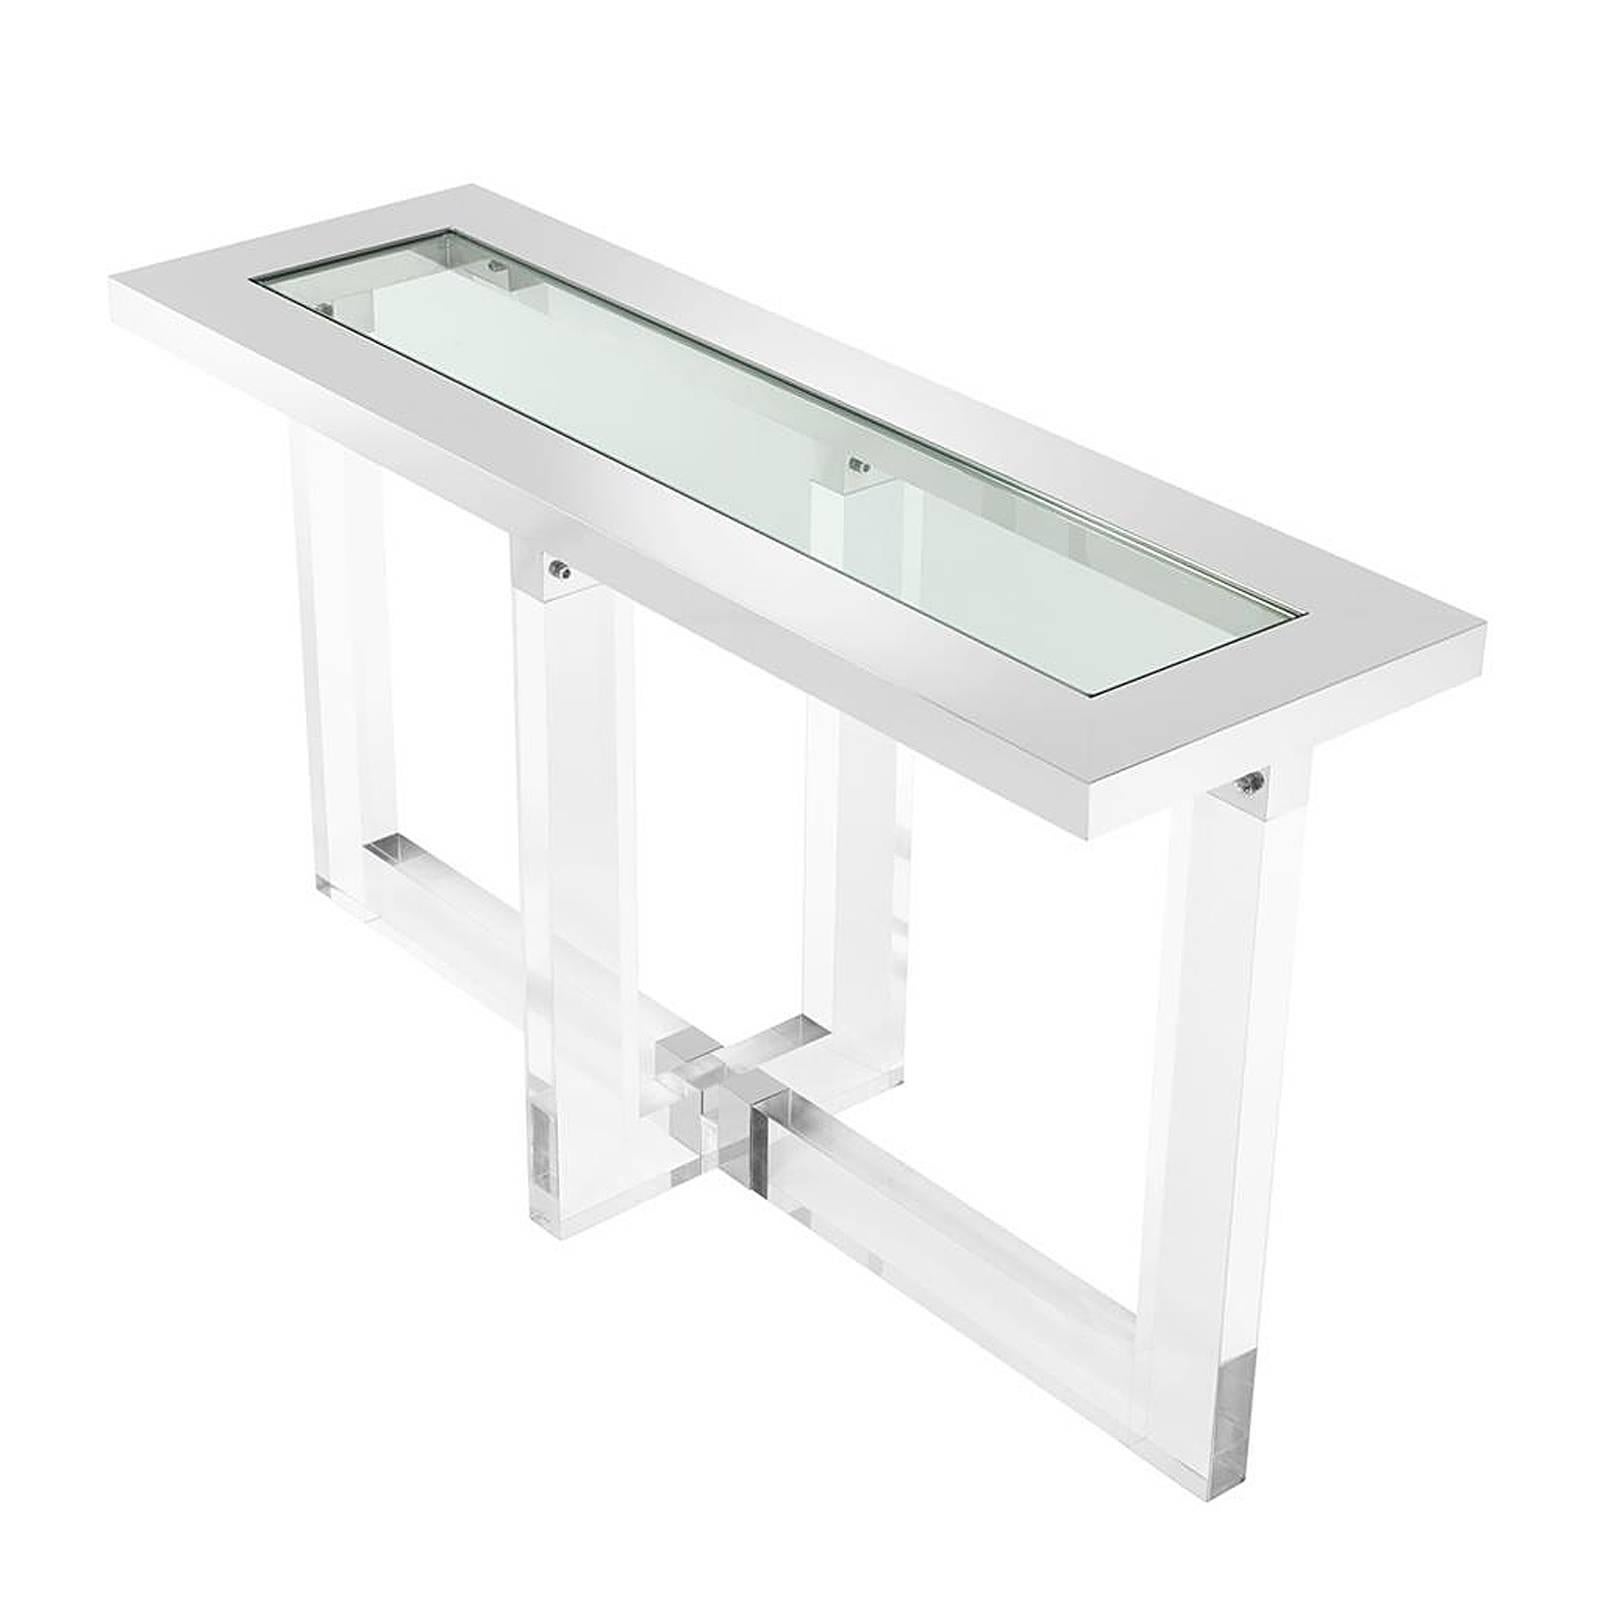 Console table Shiffrin with structure in polished stainless 
steel and clear acrylic. With clear glass top.
Also available in rectangular or square coffee table or in
side table.